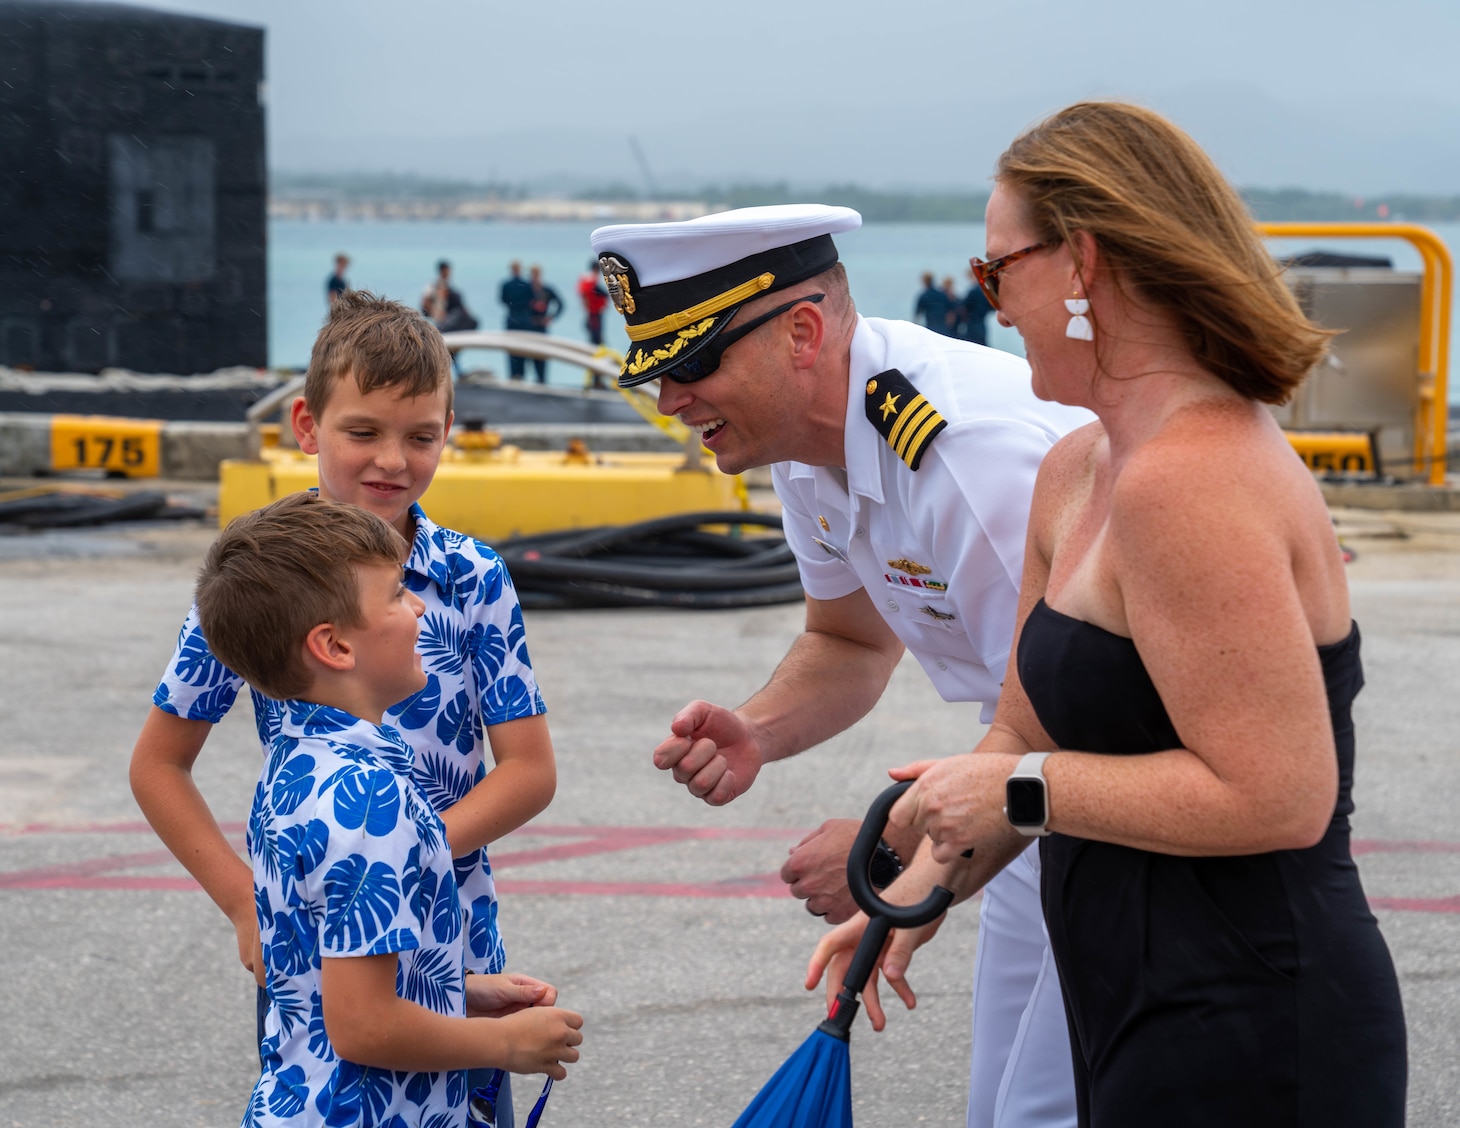 POLARIS POINT, Guam (Jan. 9, 2023) Cmdr. Andrew Domina, commanding officer of the Los Angeles-class fast-attack submarine USS Springfield (SSN 761),  greets his family after Springfield’s return to Guam from deployment, Jan. 9. Springfield is capable of supporting various missions, including anti-submarine warfare, anti-ship warfare, strike warfare and intelligence, surveillance reconnaissance. (U.S. Navy photo by Lt. Eric Uhden)